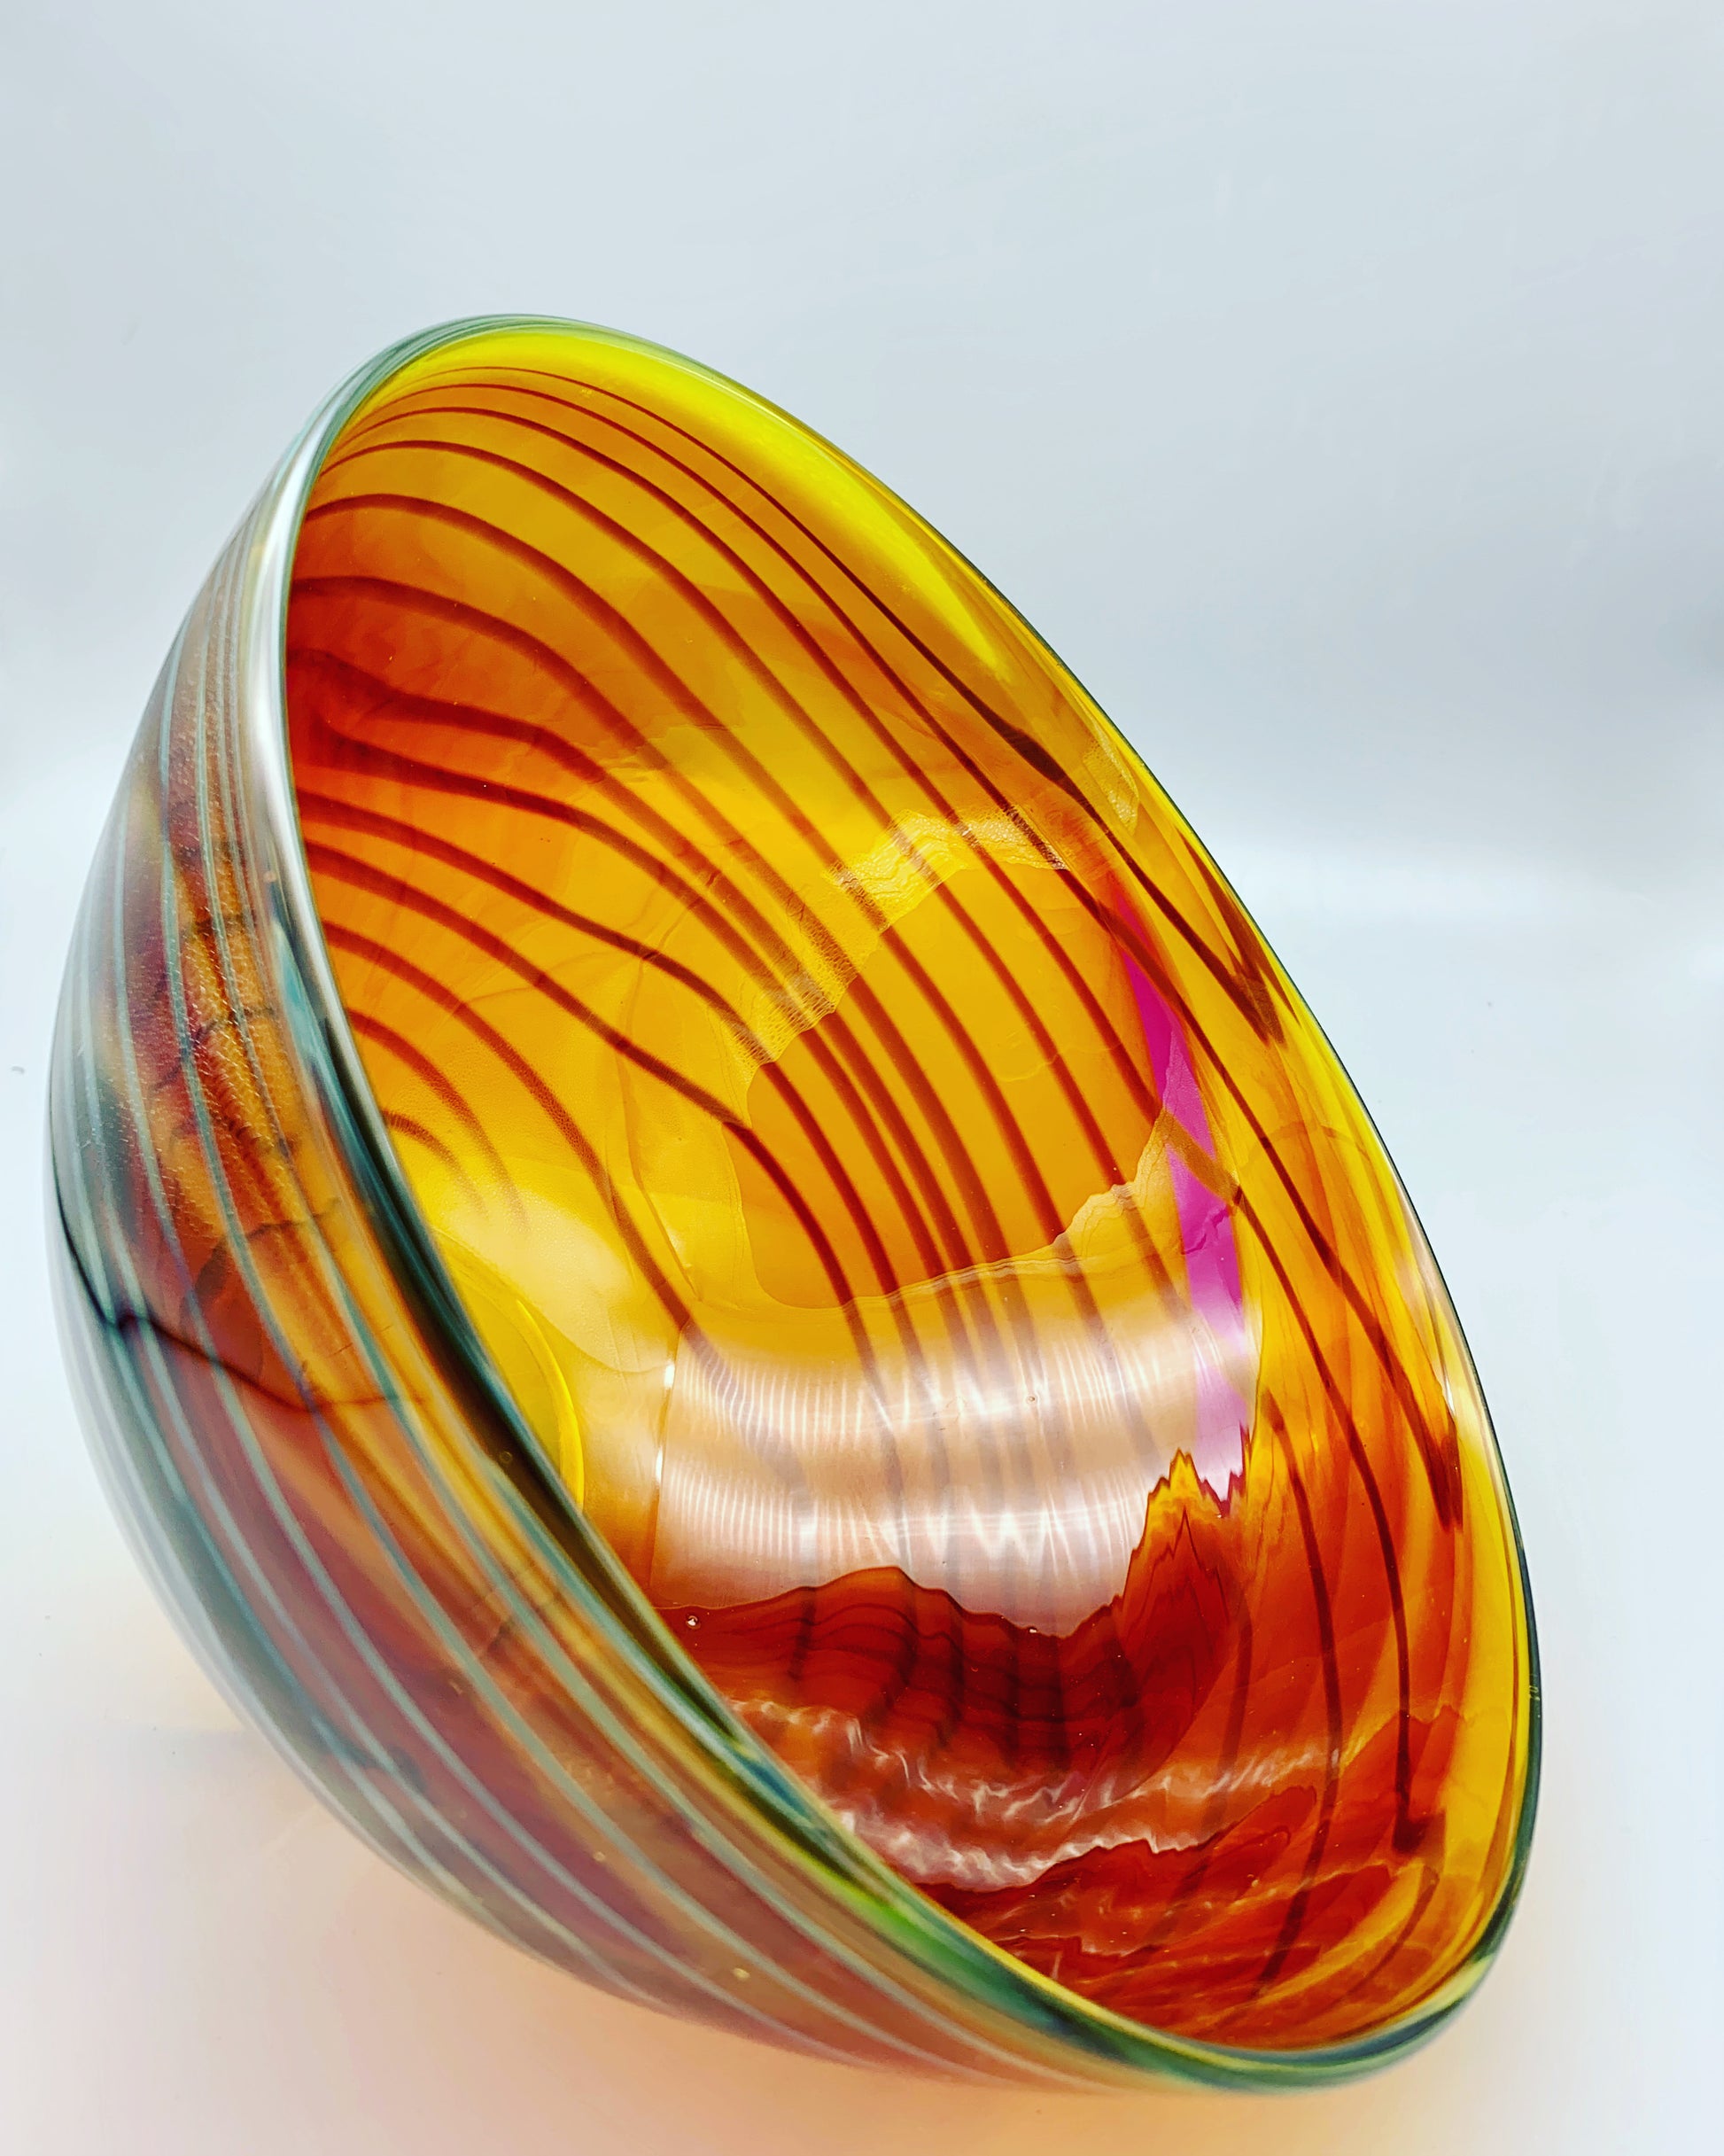 david flower autumn flared footed bowl decorative glass handblown glassware abstract